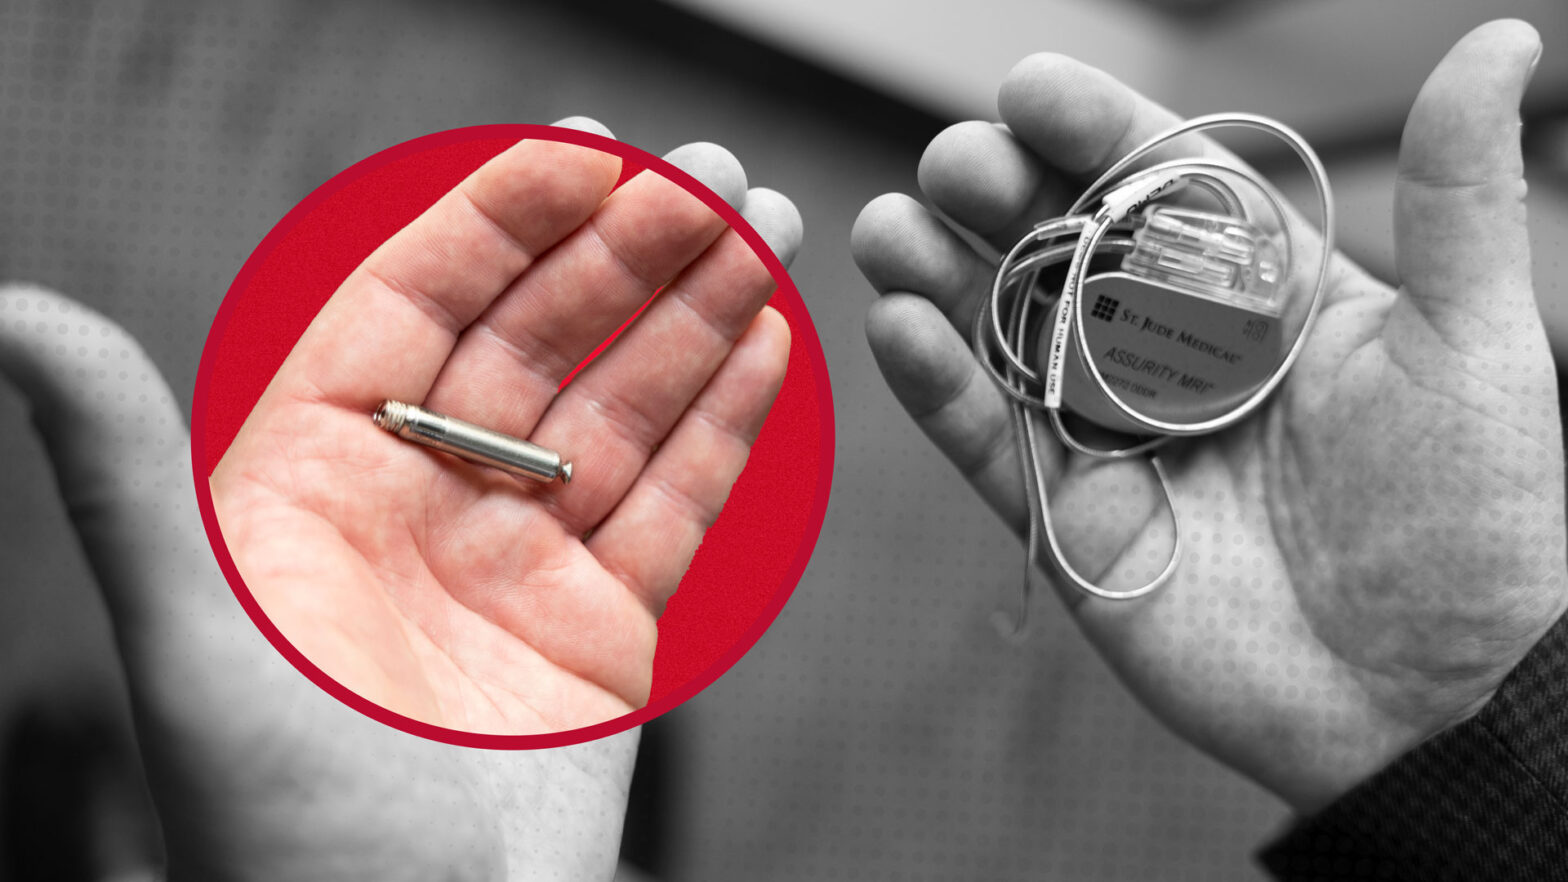 wireless peacemaker in the left hand compared to a wired pacemaker in the right hand.